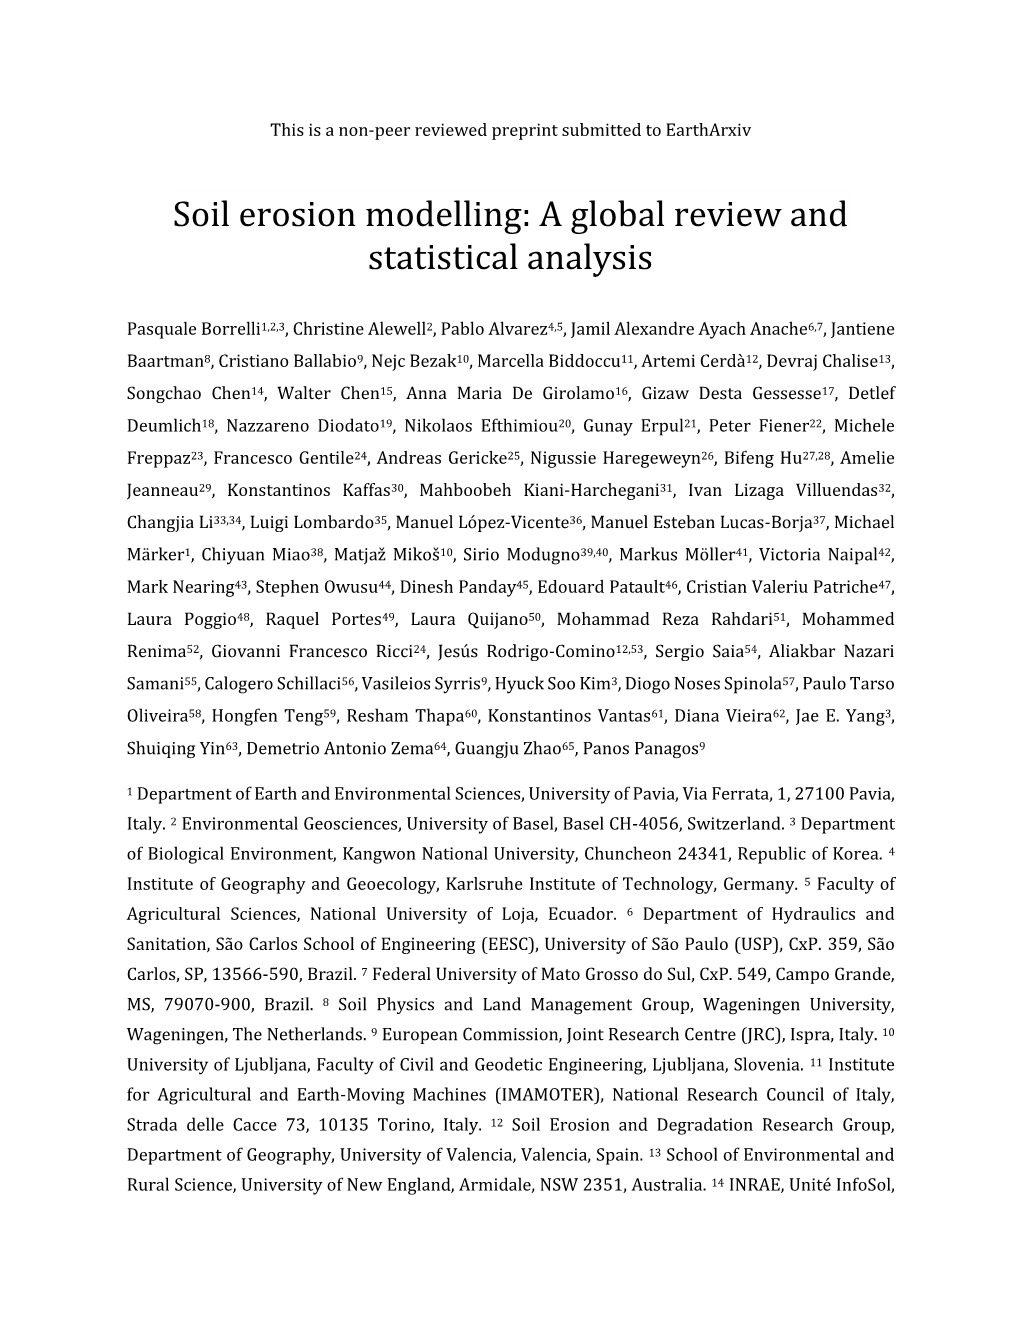 Soil Erosion Modelling: a Global Review and Statistical Analysis